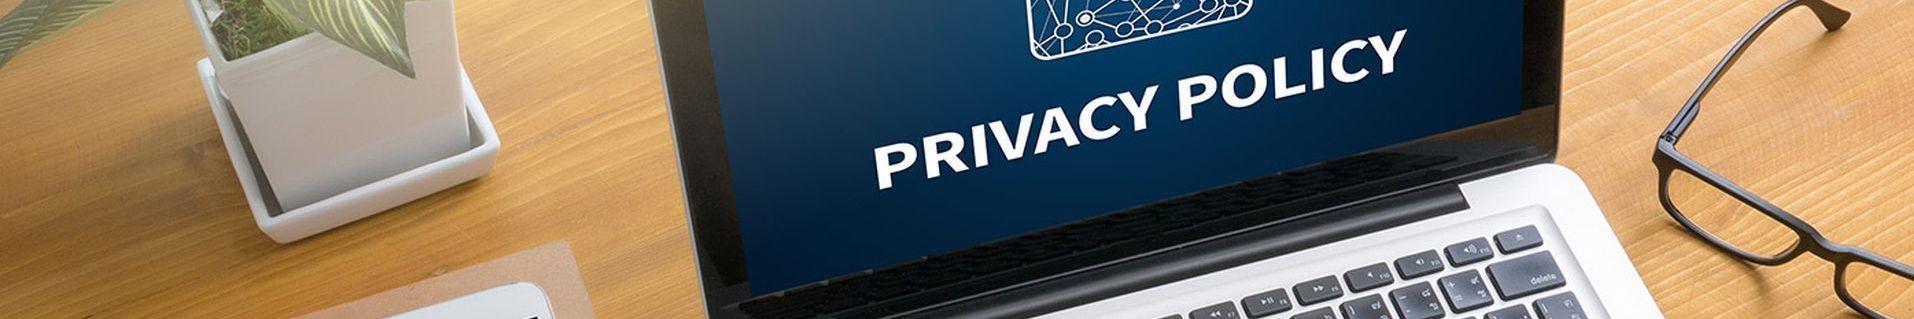 Spinder privacy policy